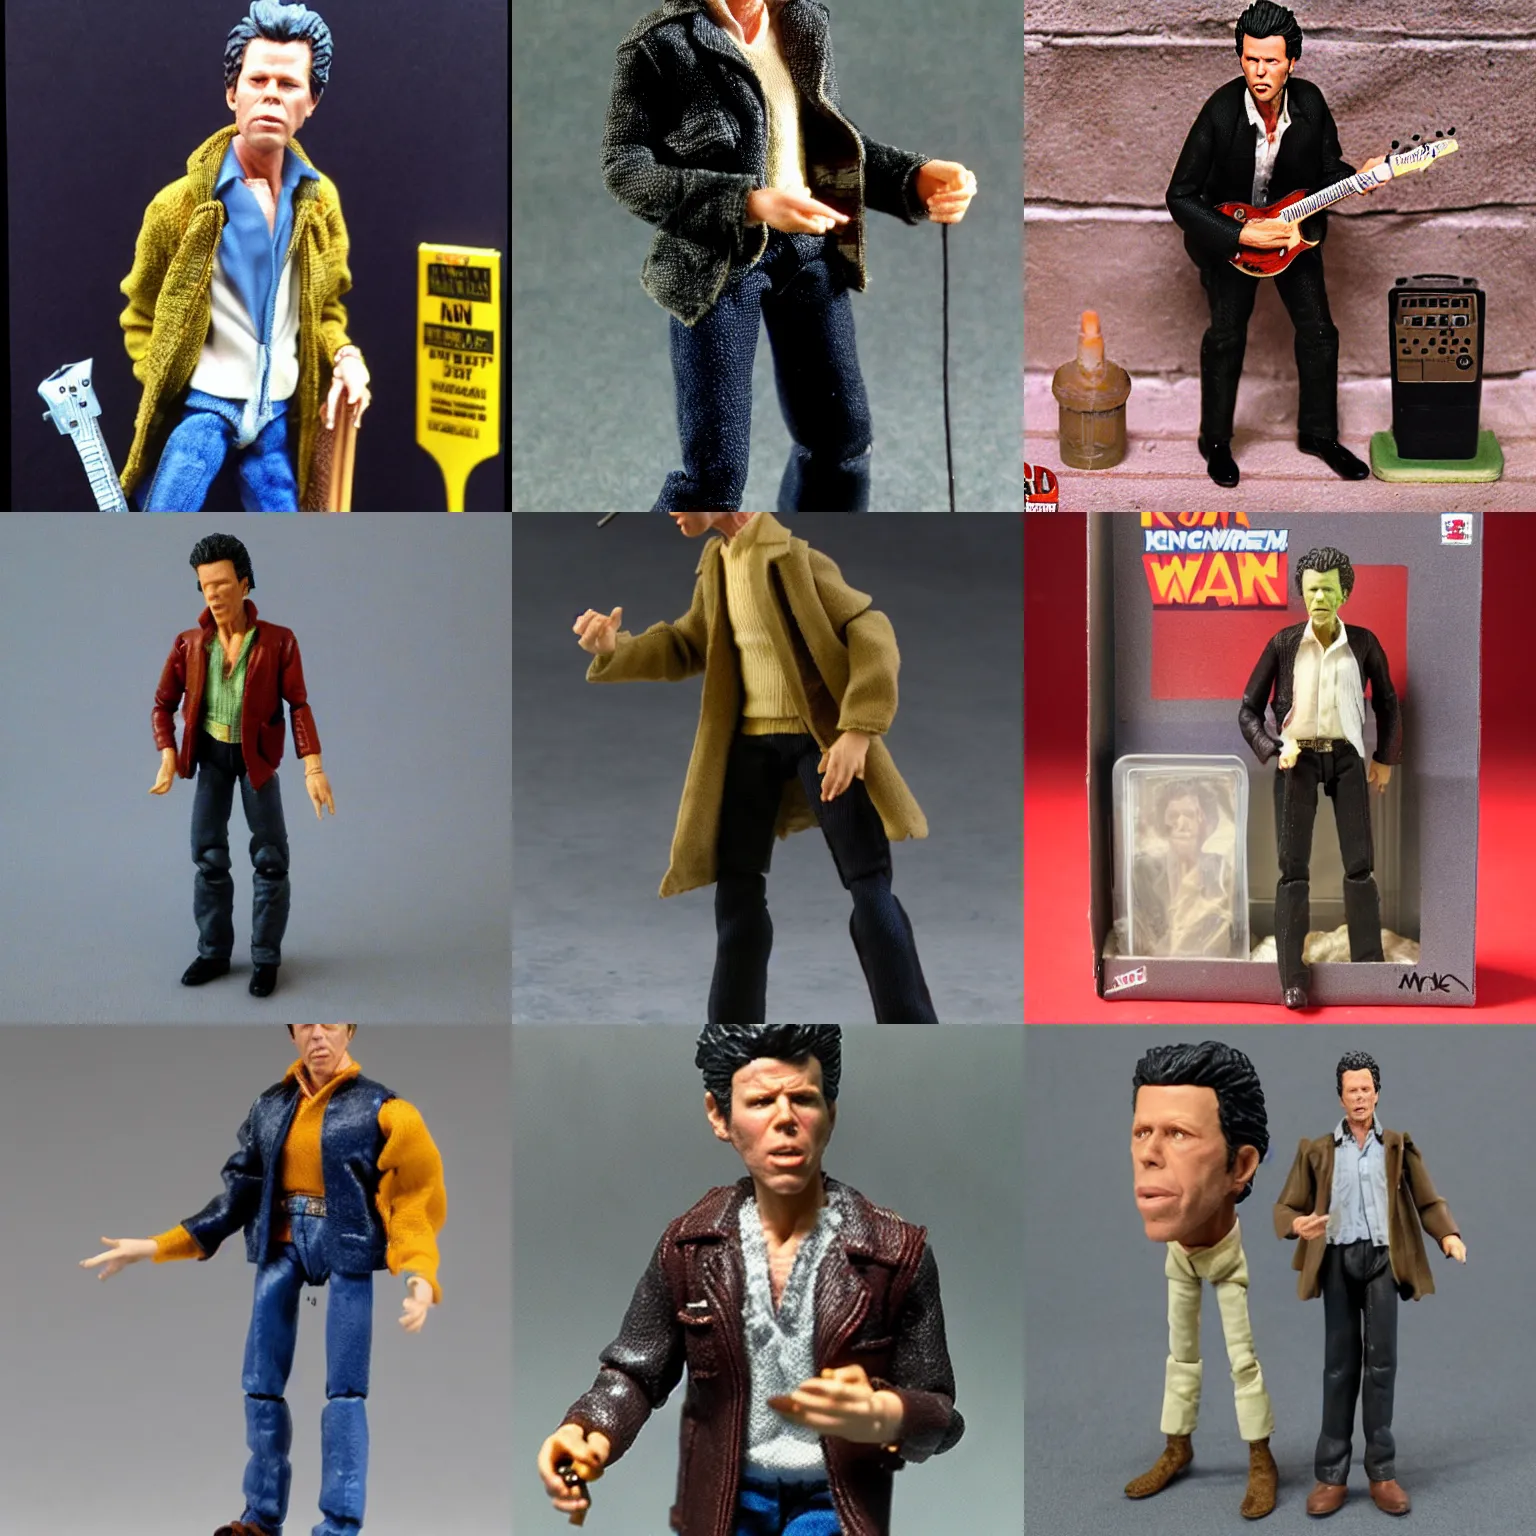 Prompt: kenner action figure of tom waits